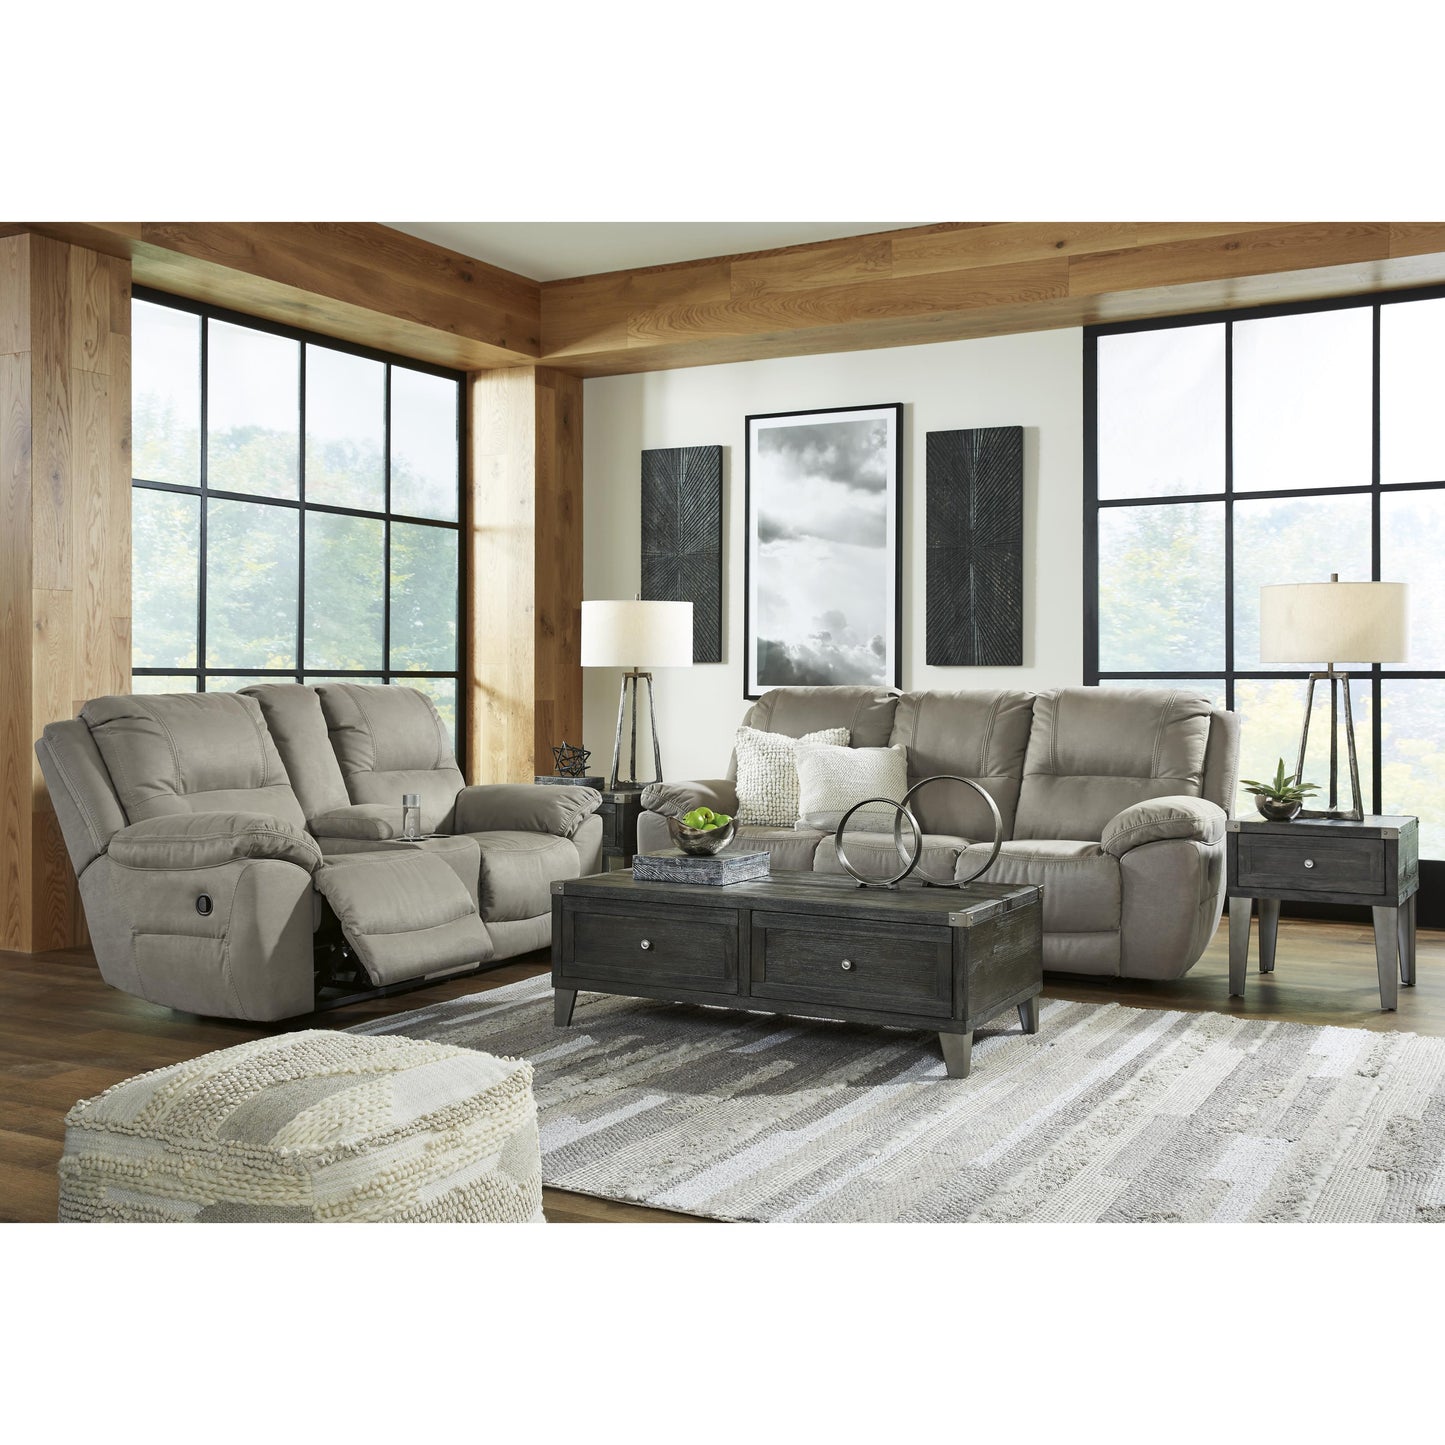 Signature Design by Ashley Next-Gen Gaucho Reclining Leather Look Loveseat 5420394 IMAGE 9